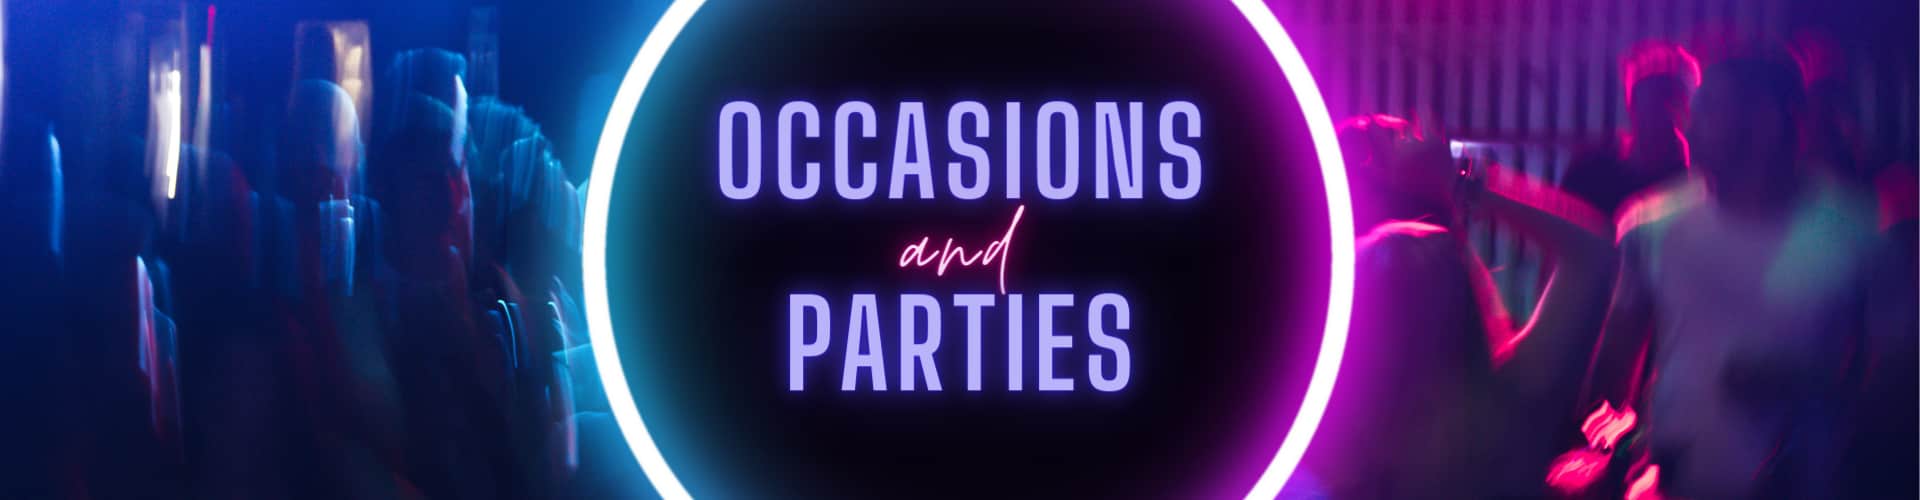 Occasions and Parties at Forge